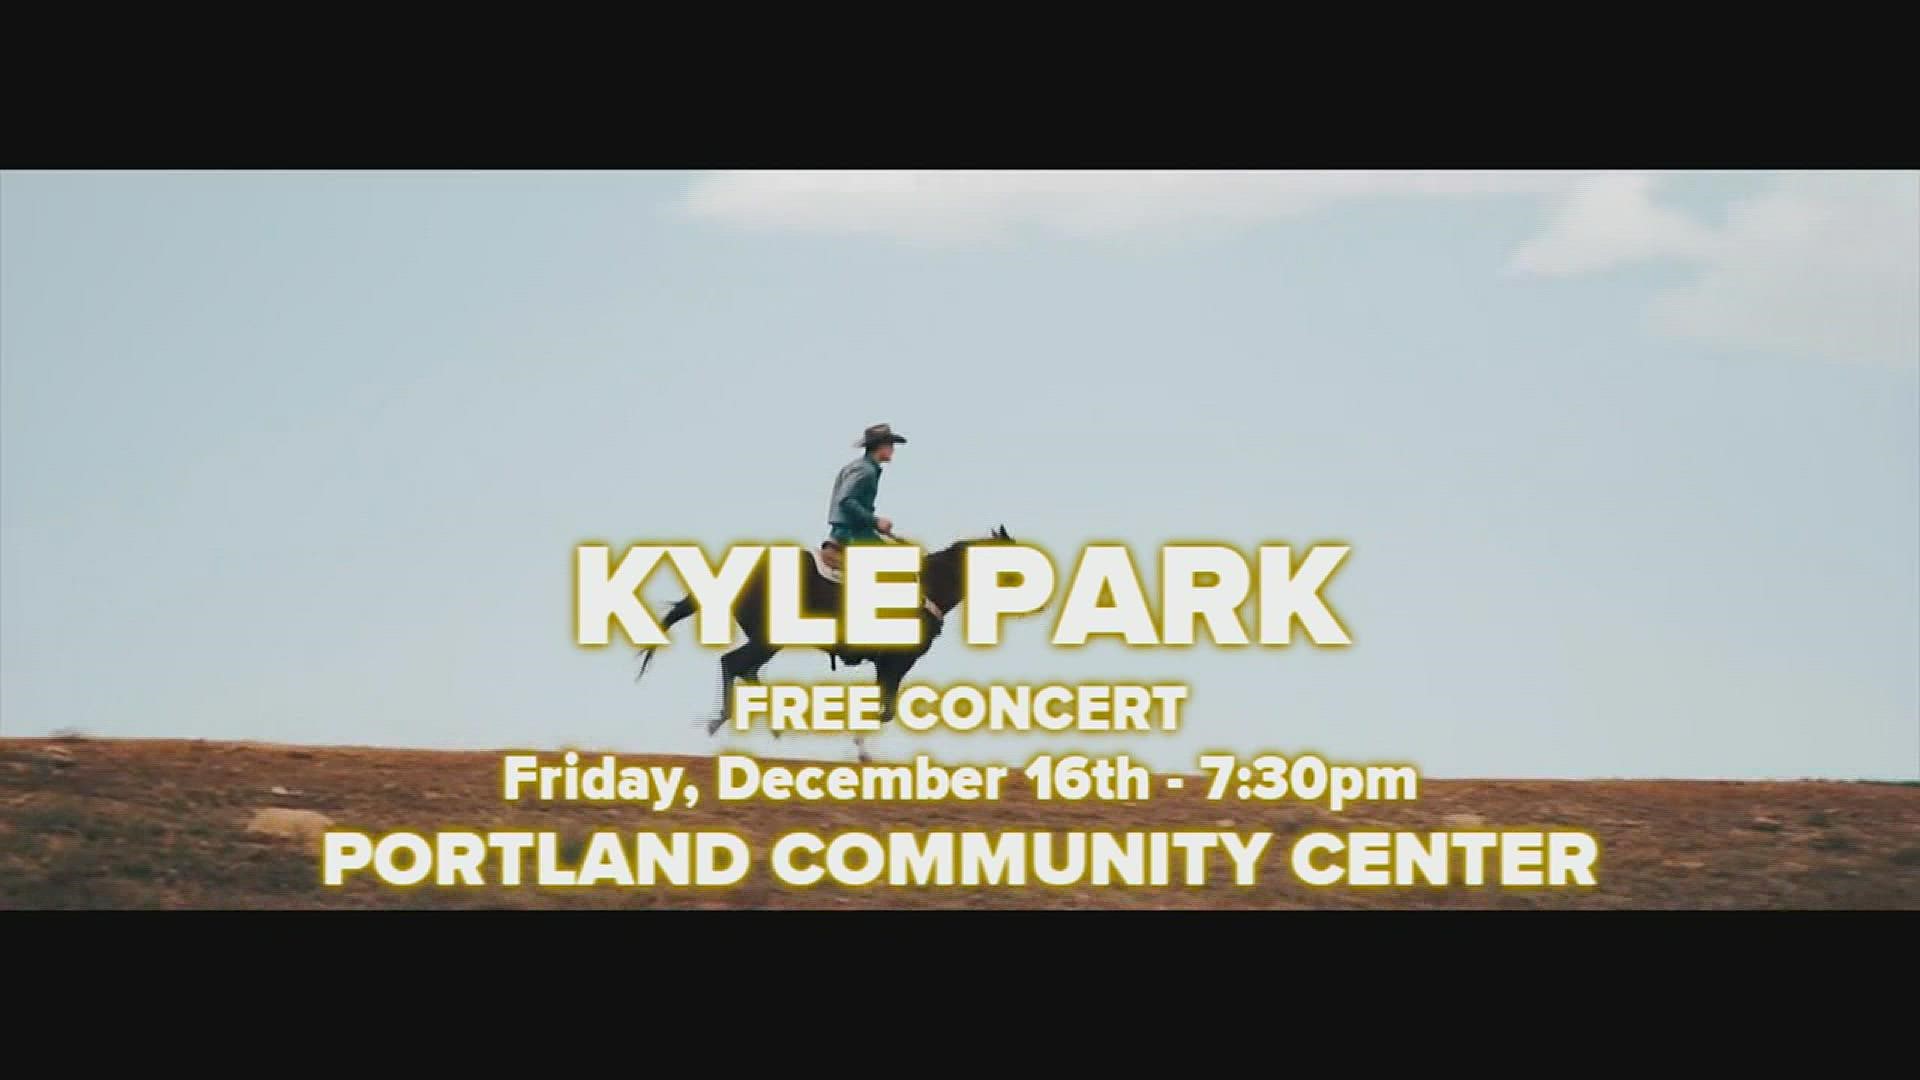 Kyle Park is set to perform a free concert in the Portland Community Center parking lot after the Illuminated Tinsel Trot 5K on Dec. 16.